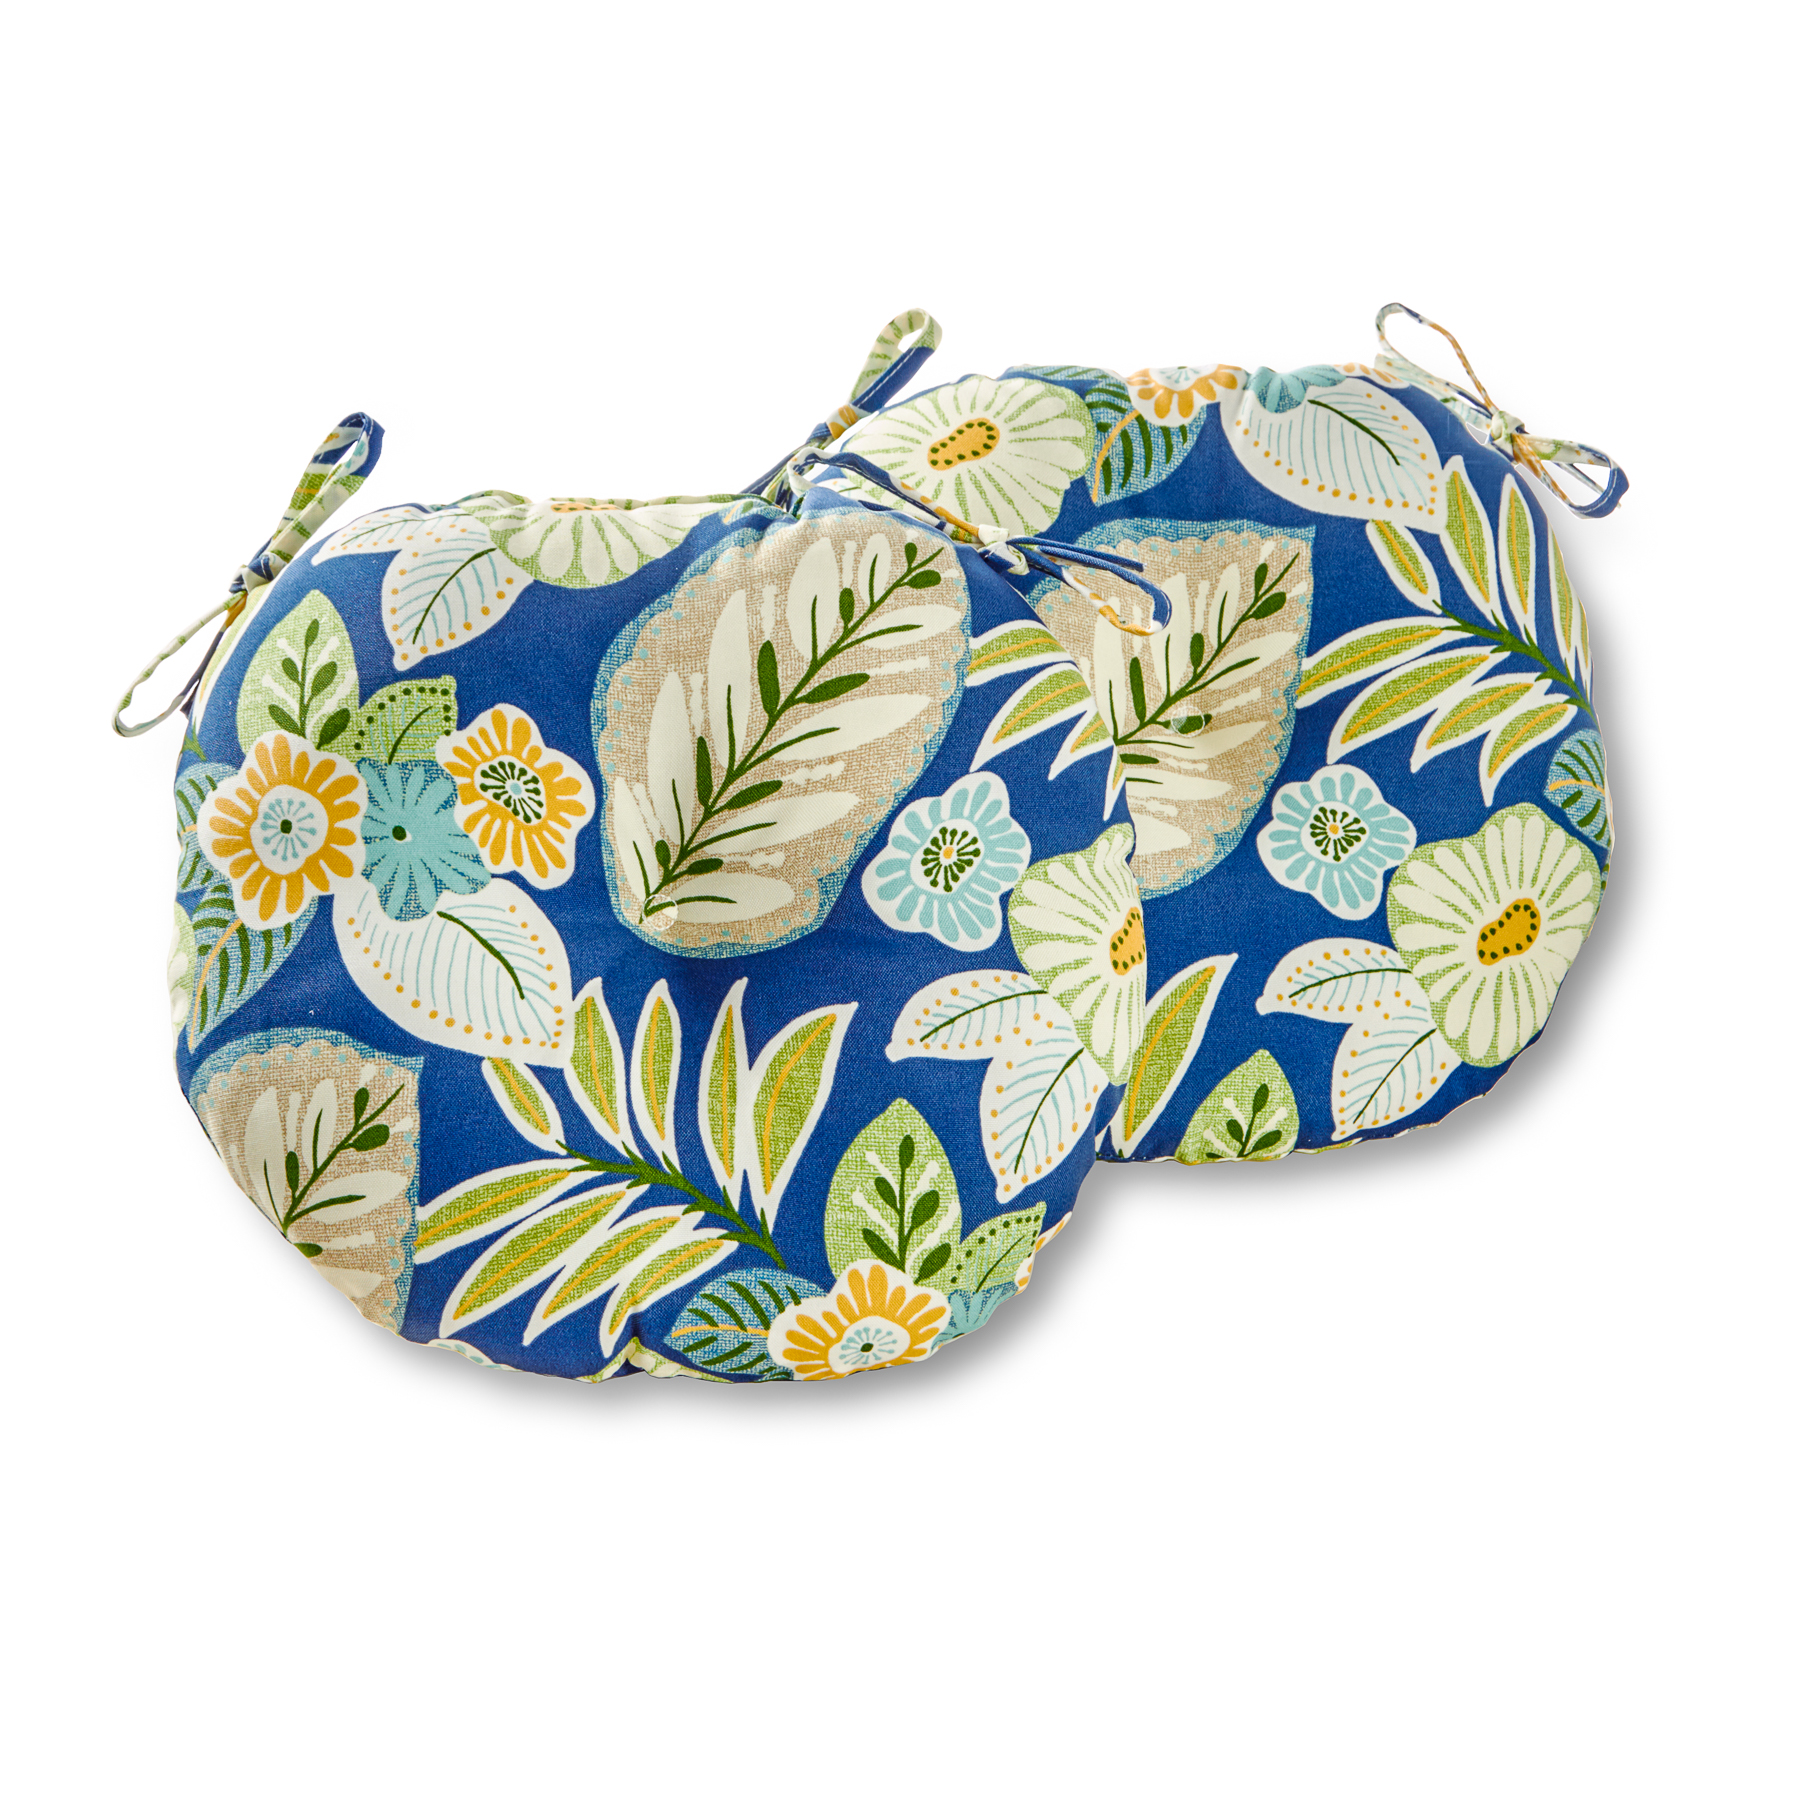 Greendale Home Fashions Marlow Blue Floral 15 in. Round Outdoor Reversible Bistro Seat Cushion (Set of 2) - image 1 of 7